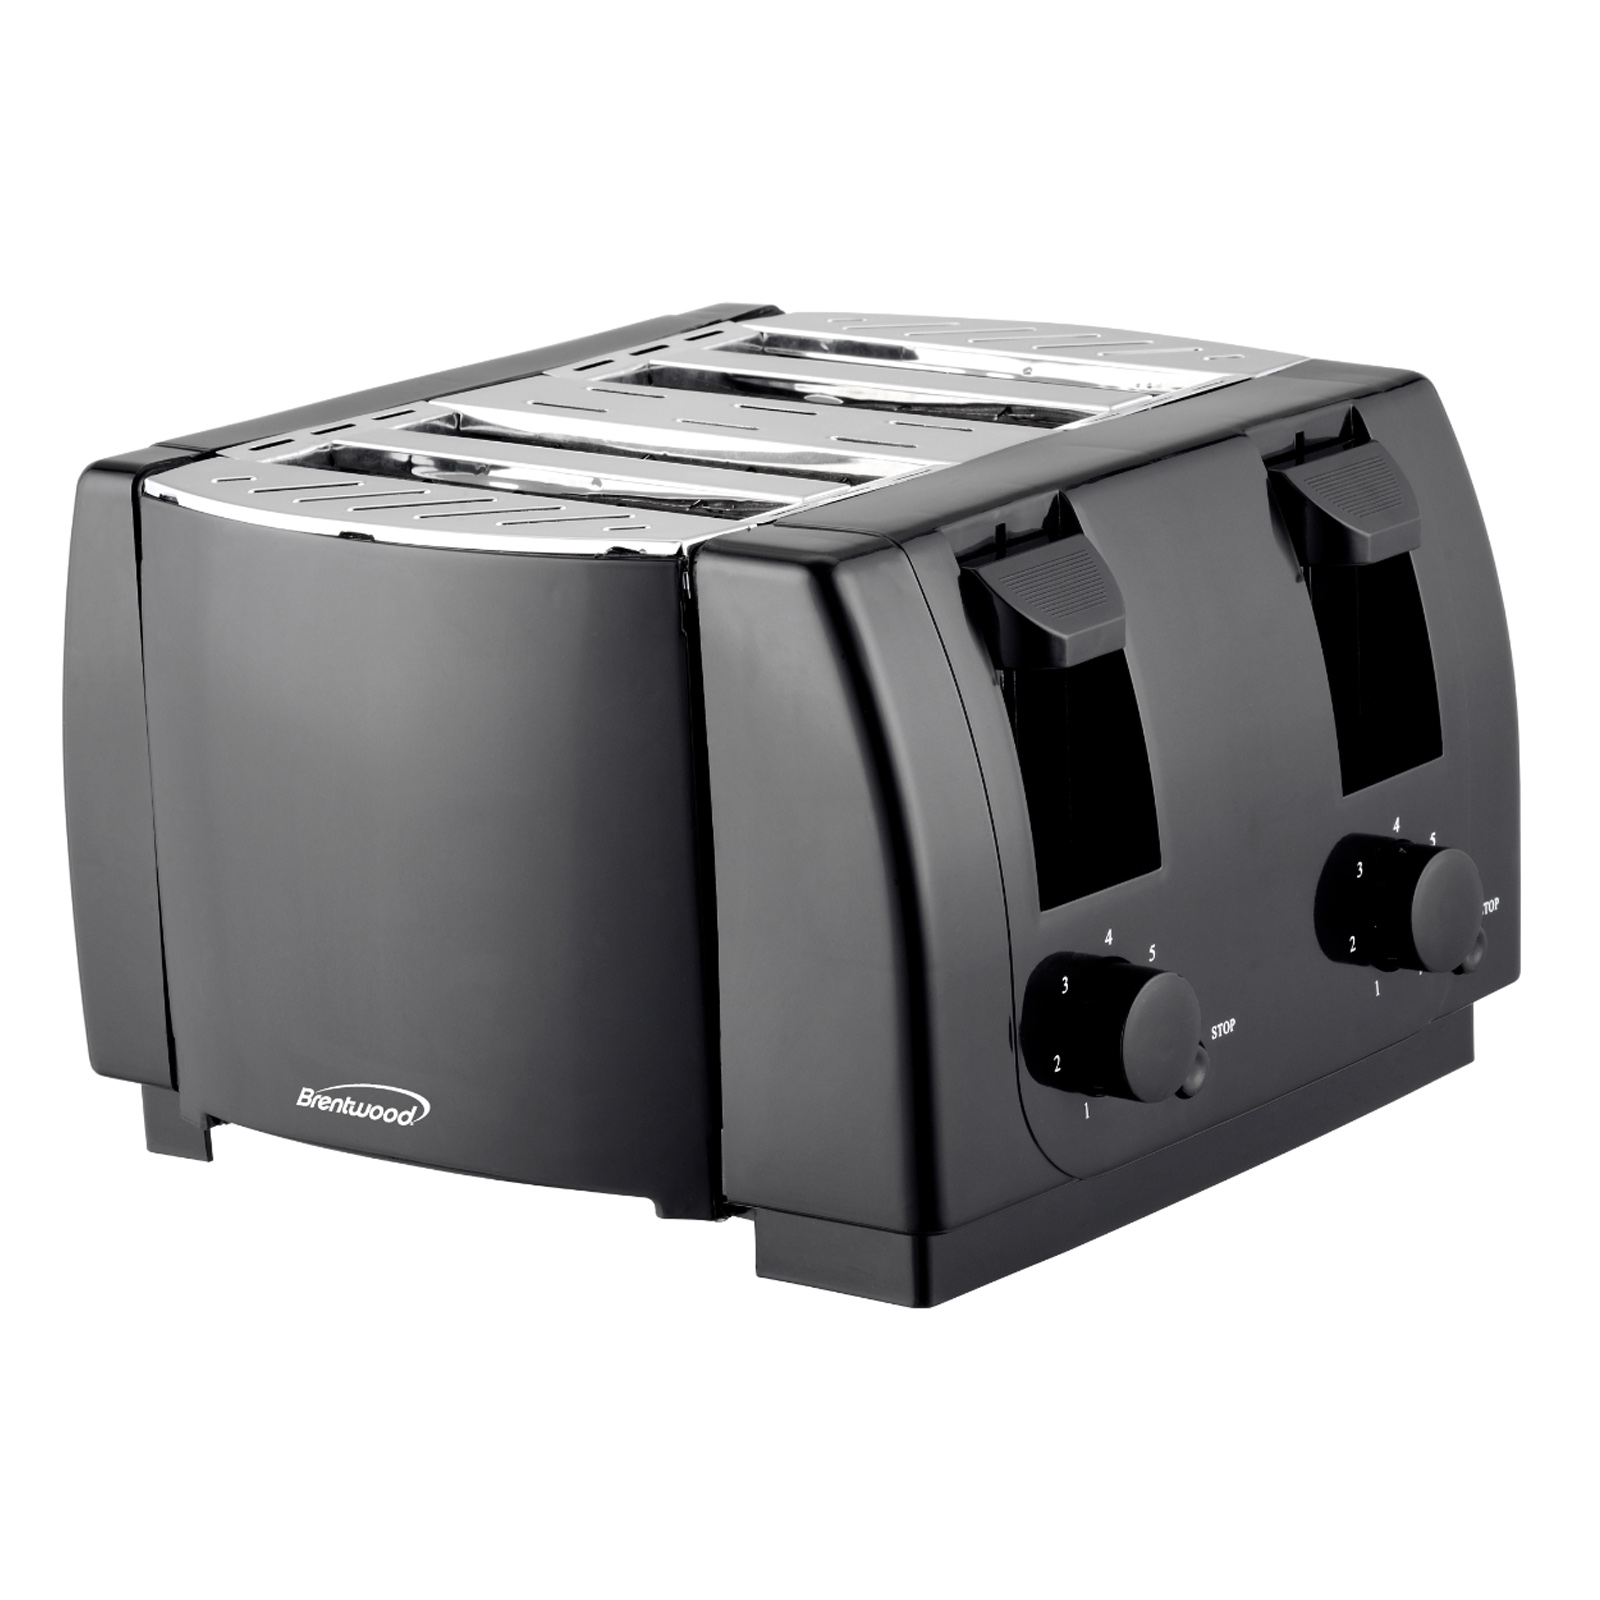 Brentwood 970110412M Cool Touch 4 Slice Toaster in Black